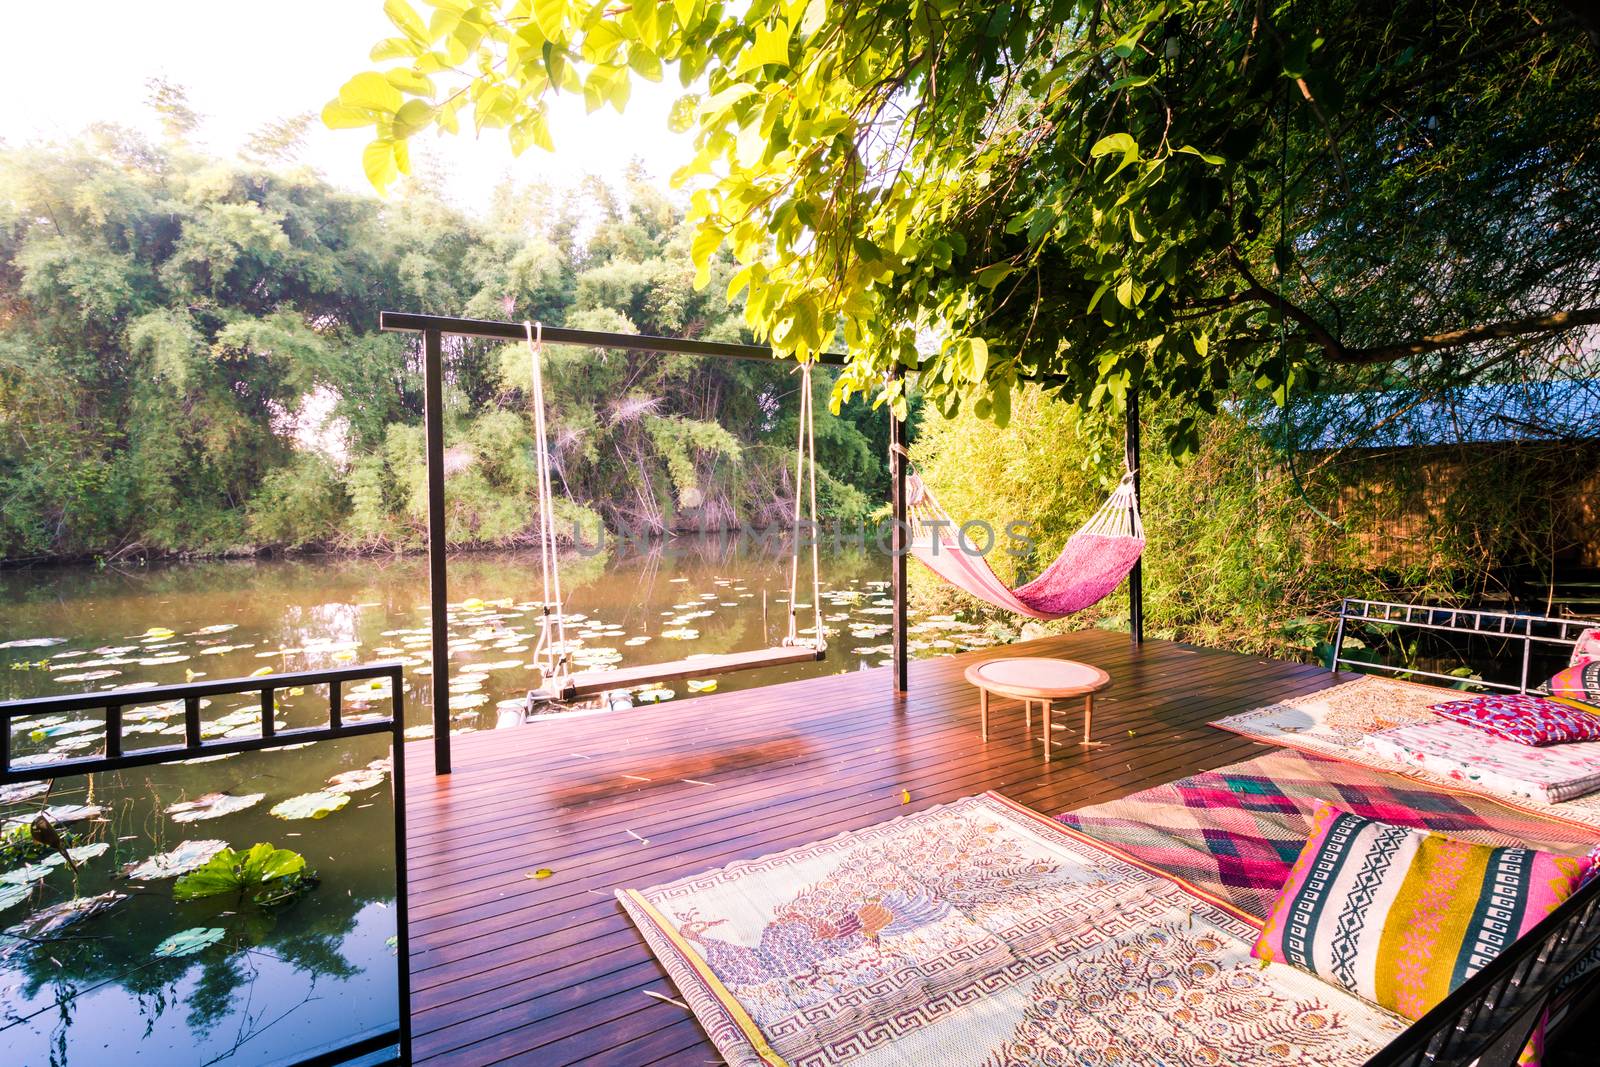 Wooden terrace under tree locate on swamp for massage 